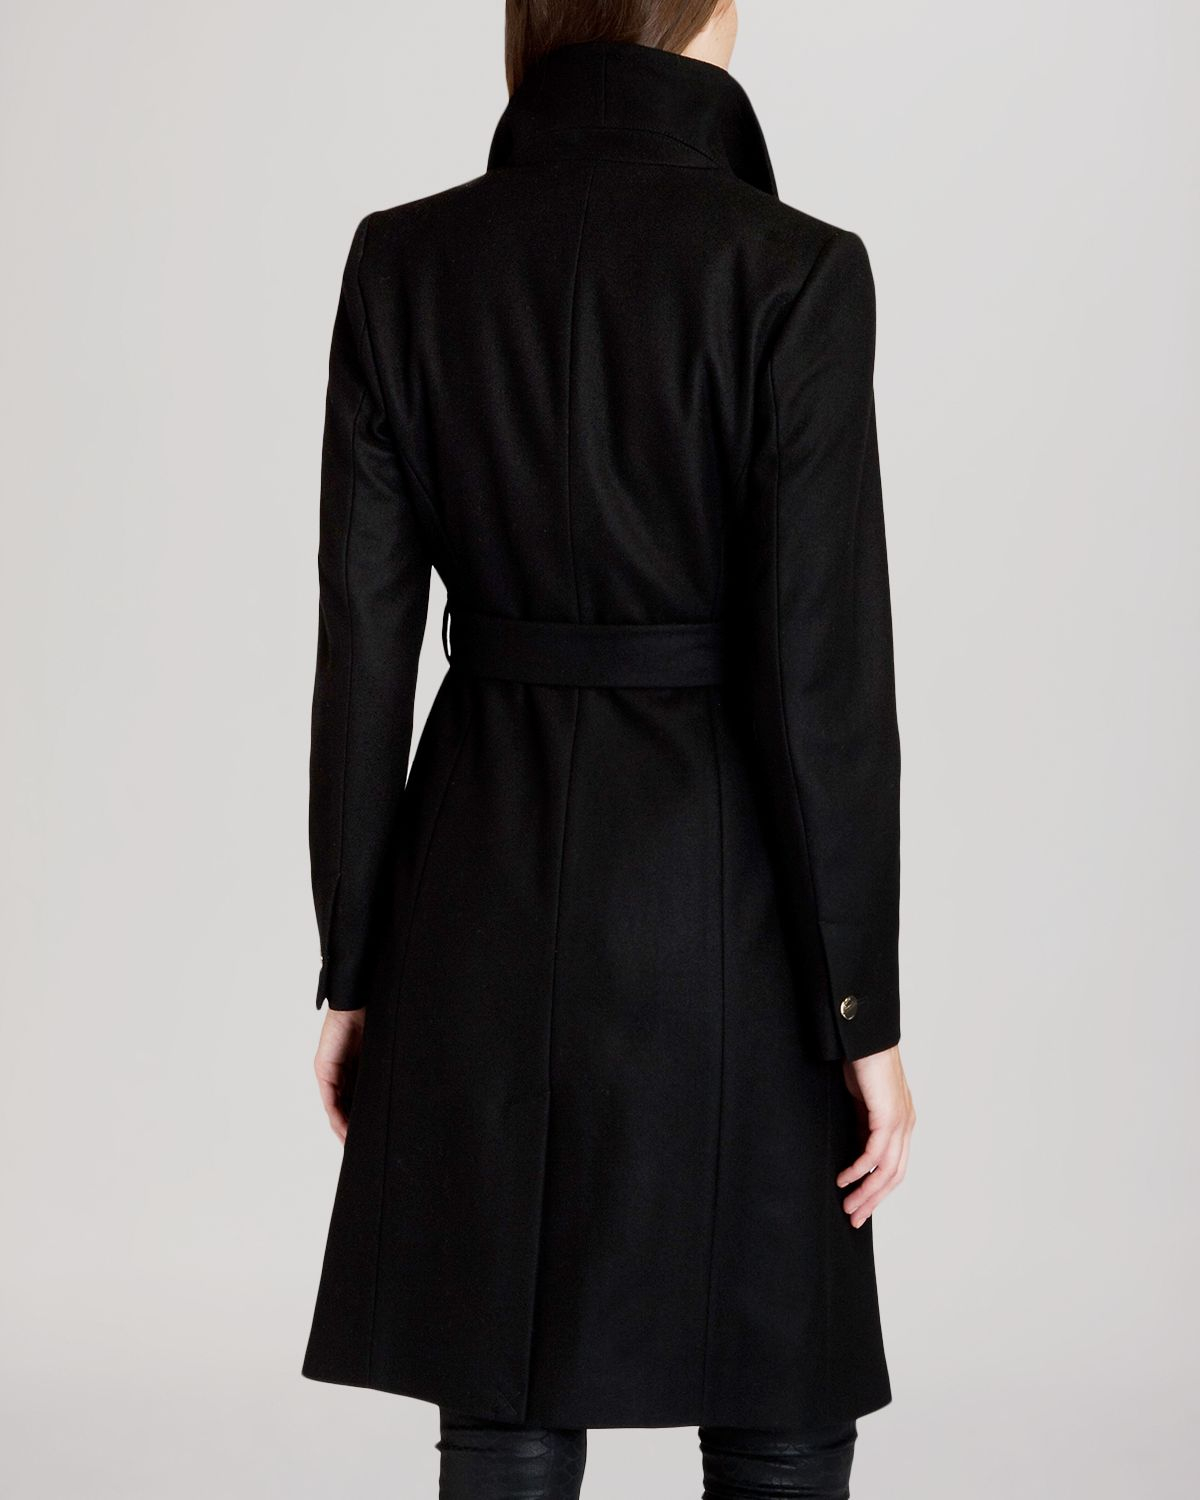 Lyst - Ted Baker Coat - Nevia Belted Wrap in Black